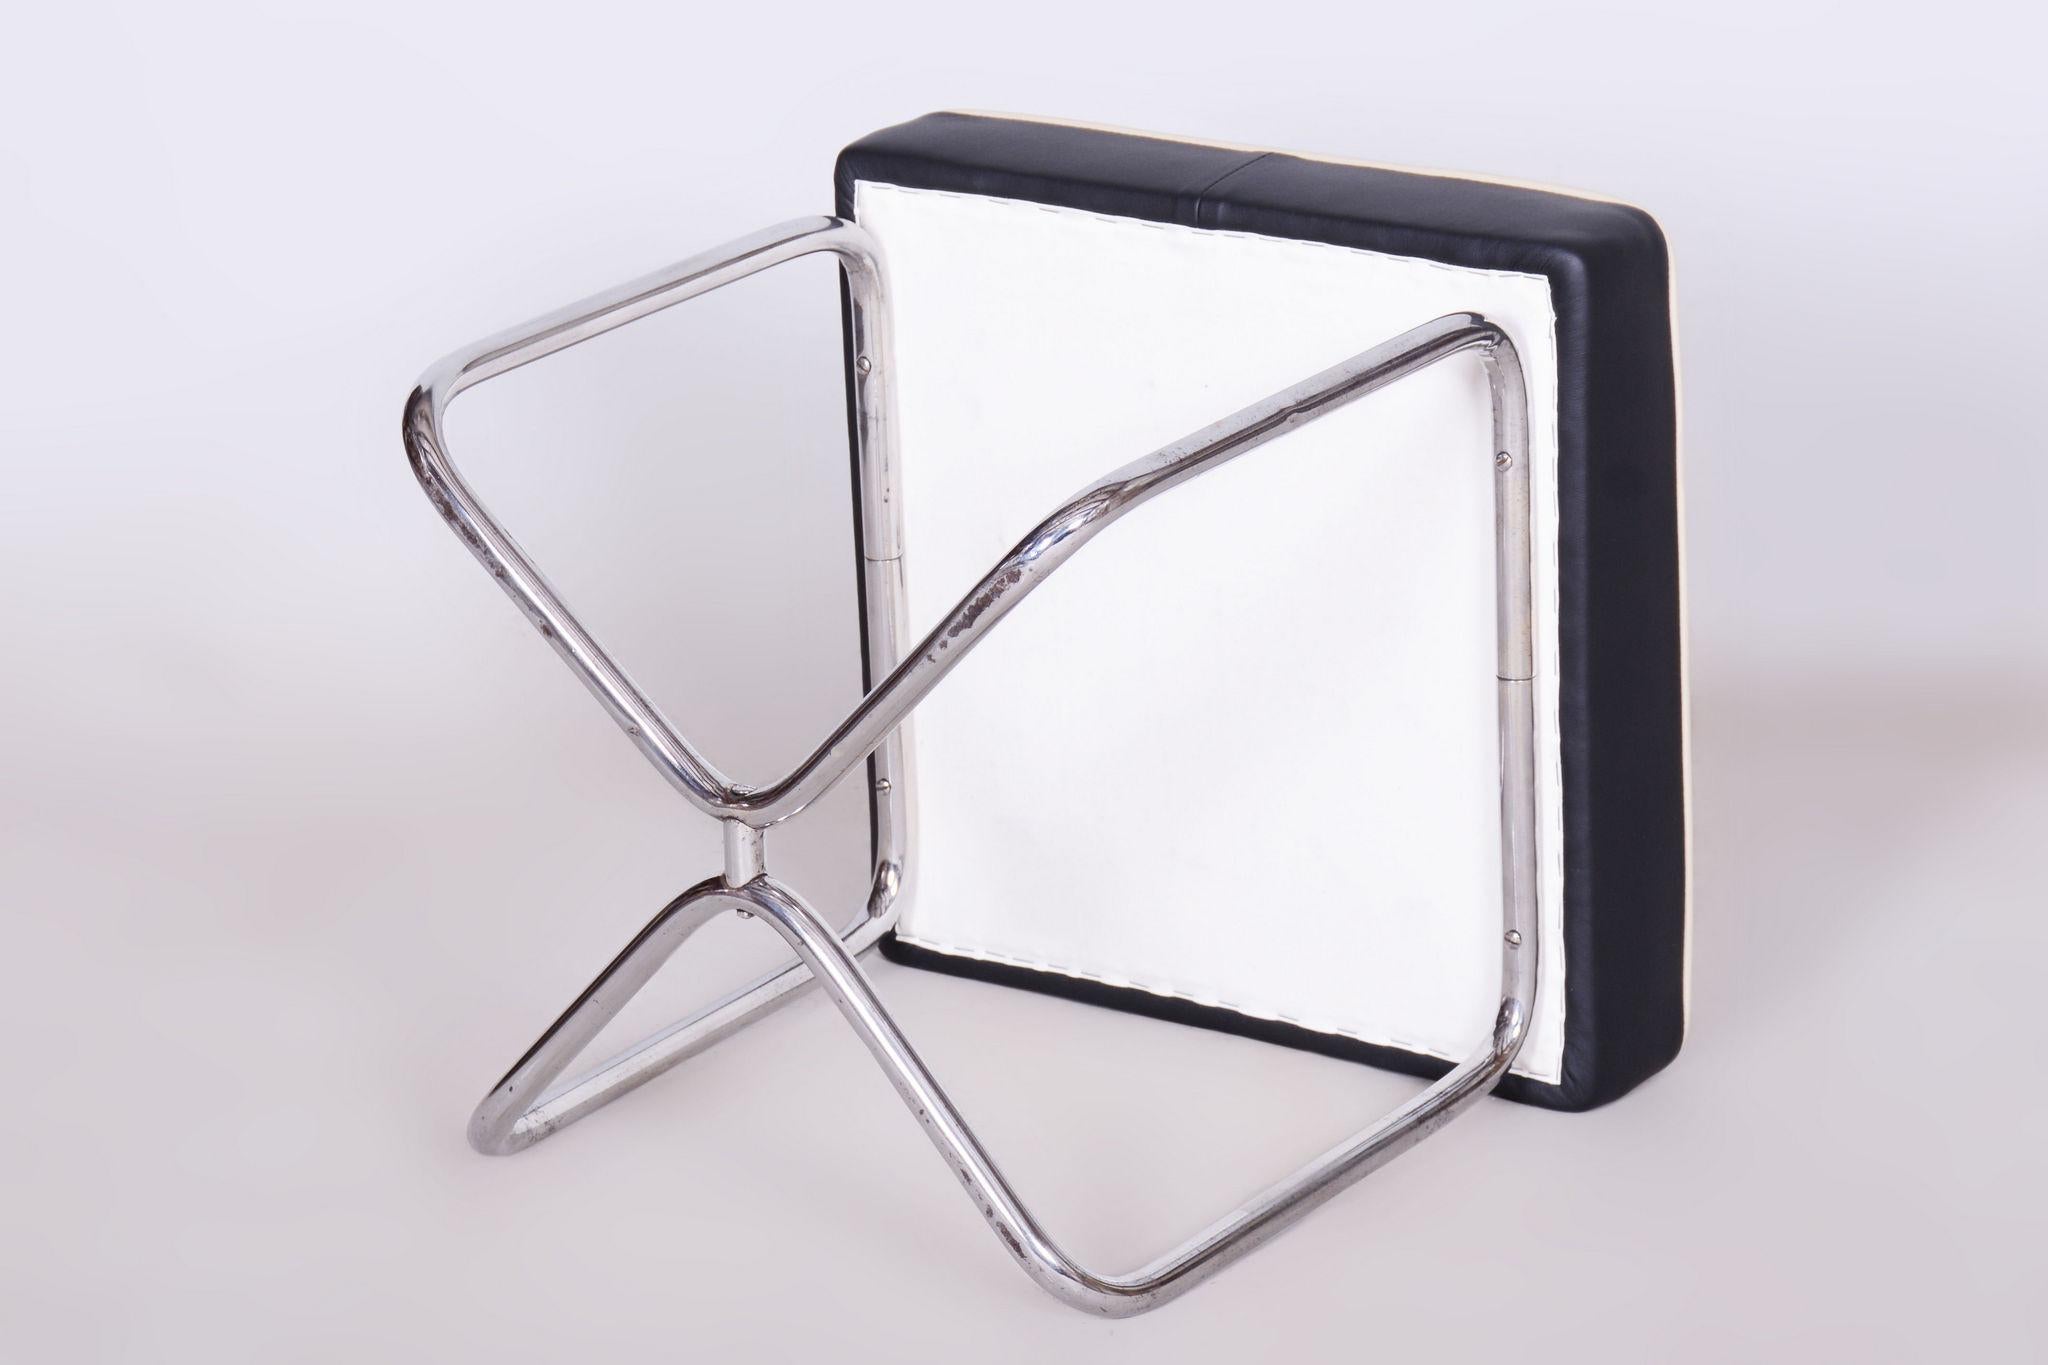 Restored Bauhaus Stool Designed By Marcel Breuer and Made By Mücke Melder.

Designer: Marcel Breuer
Maker: Mücke Melder
Material: Chrome-plated Steel, High-Quality Leather
Source: Czechia (Czechoslovakia)
Period: 1930-1939

Designed by